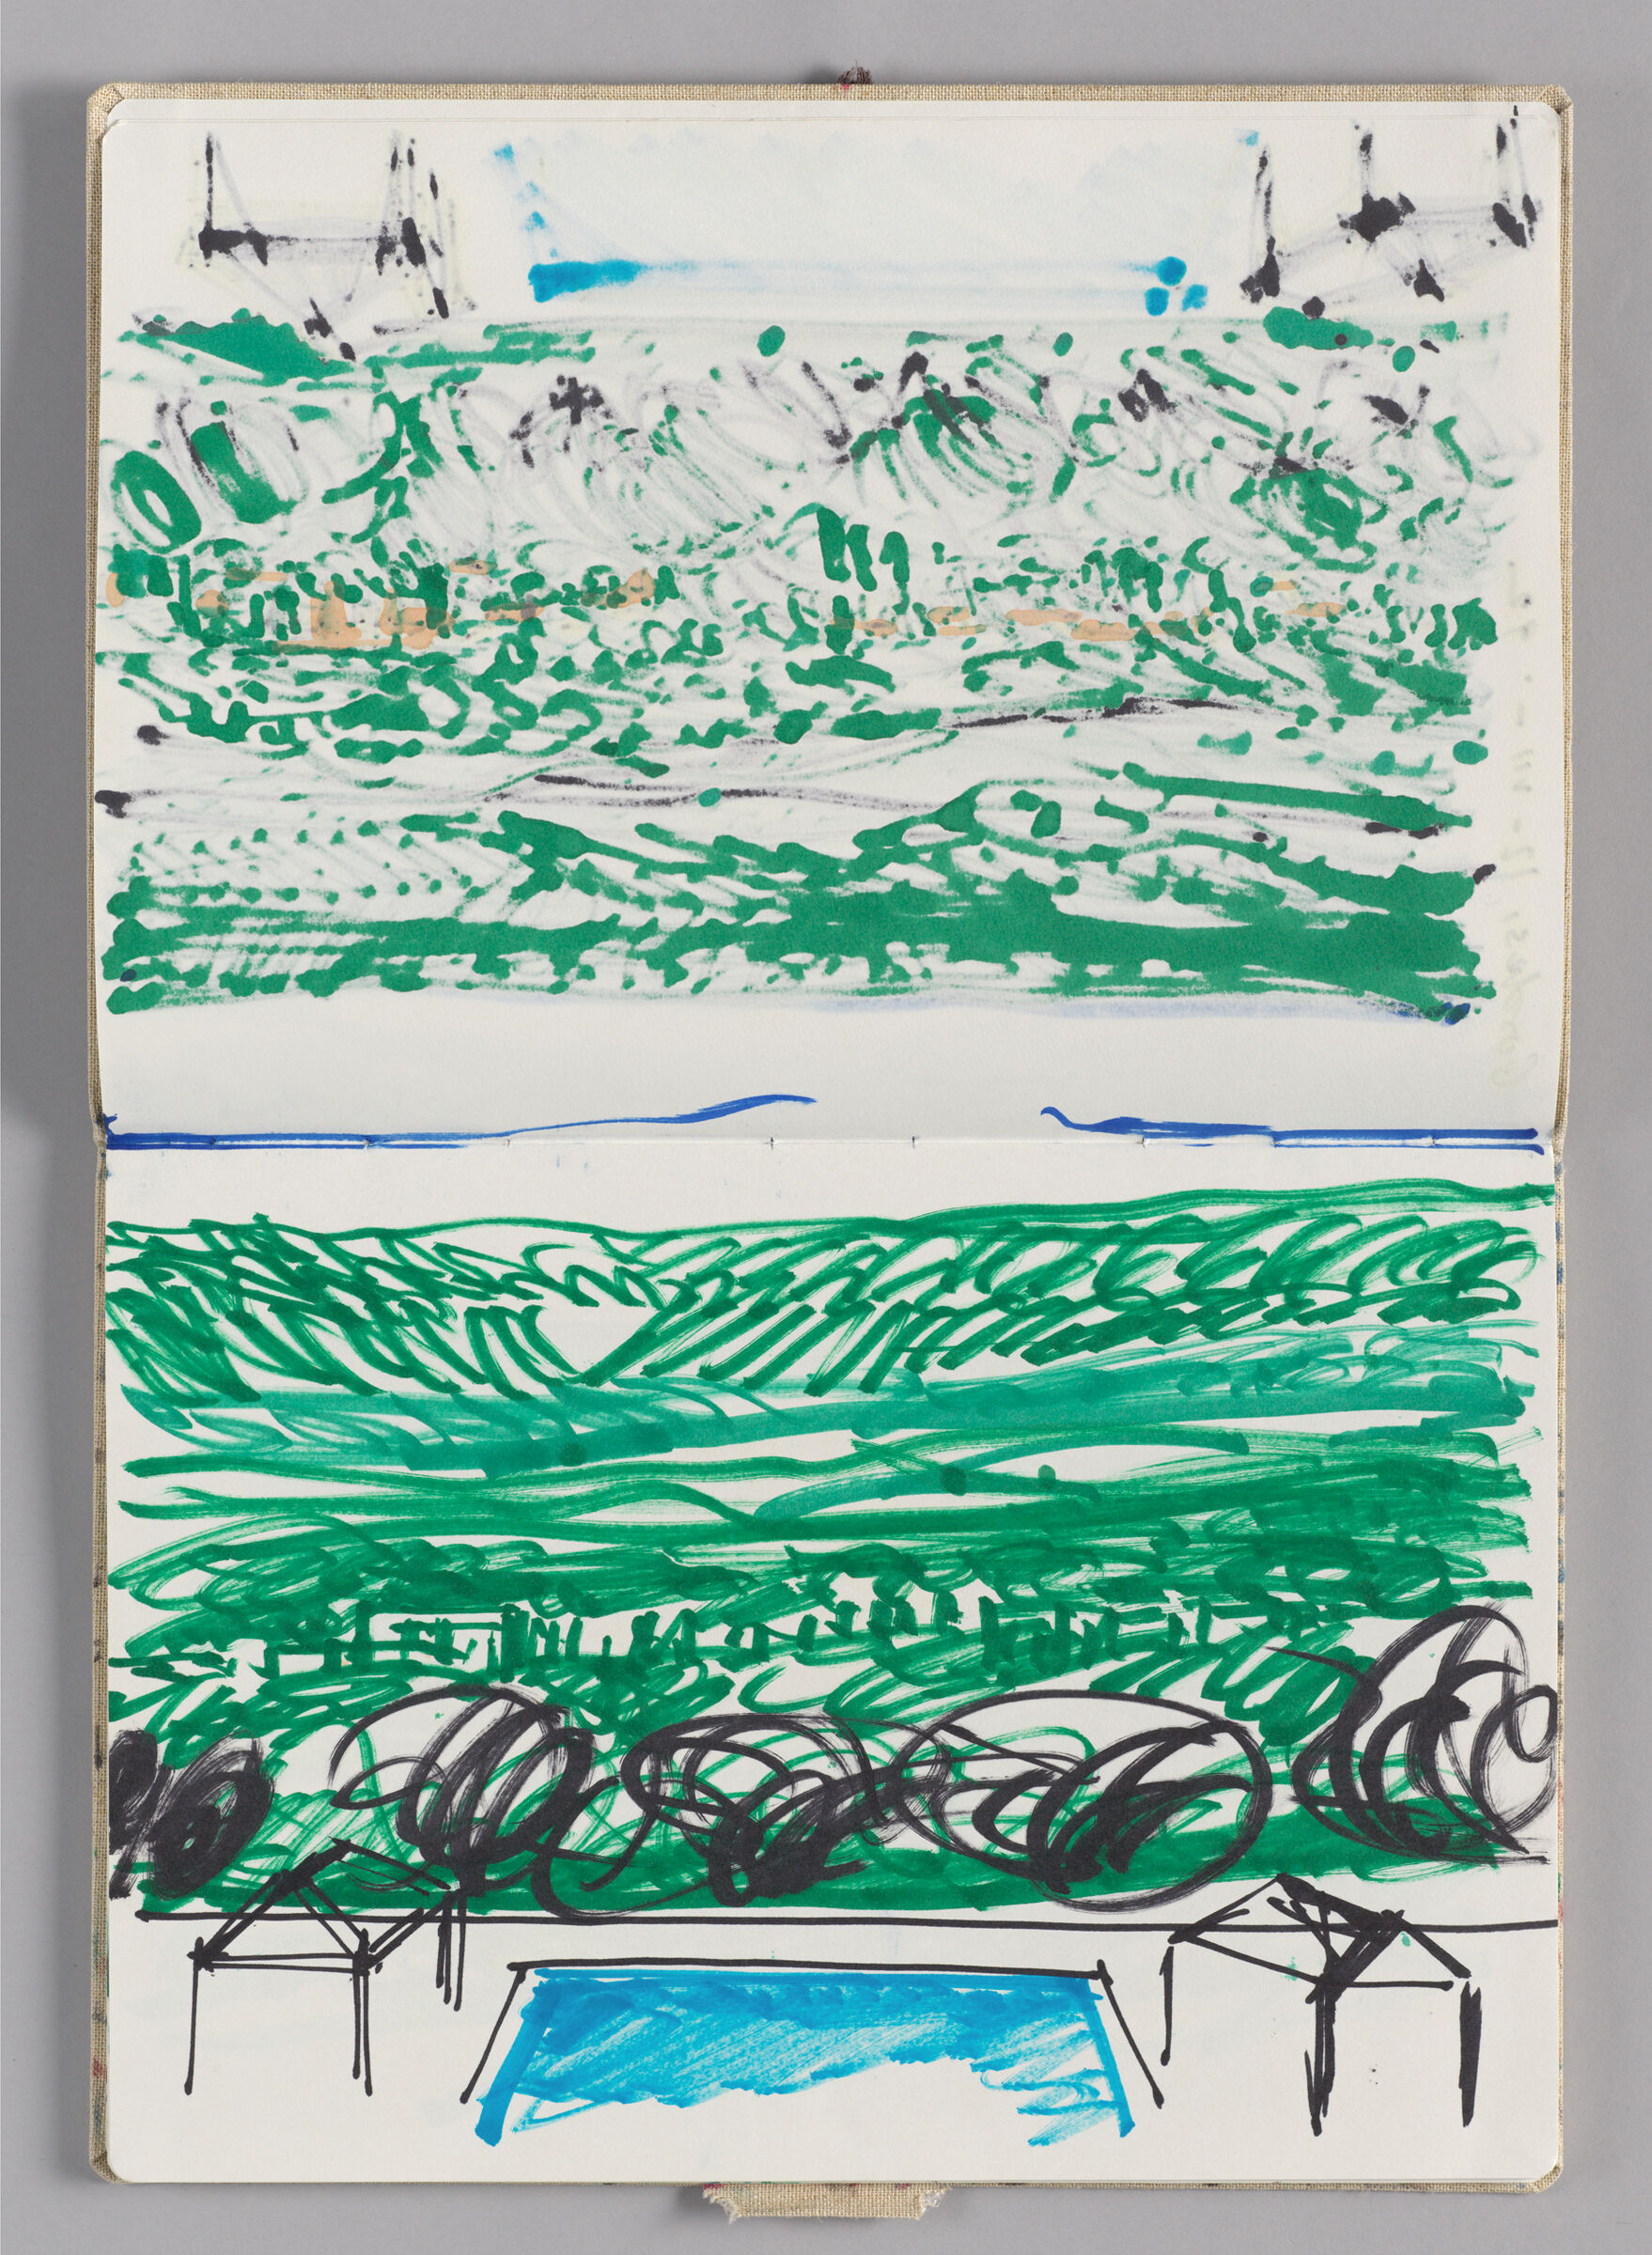 Untitled (Bleed-Through Of Previous Page, Left Page); Untitled (Landscape With Pool, Right Page)